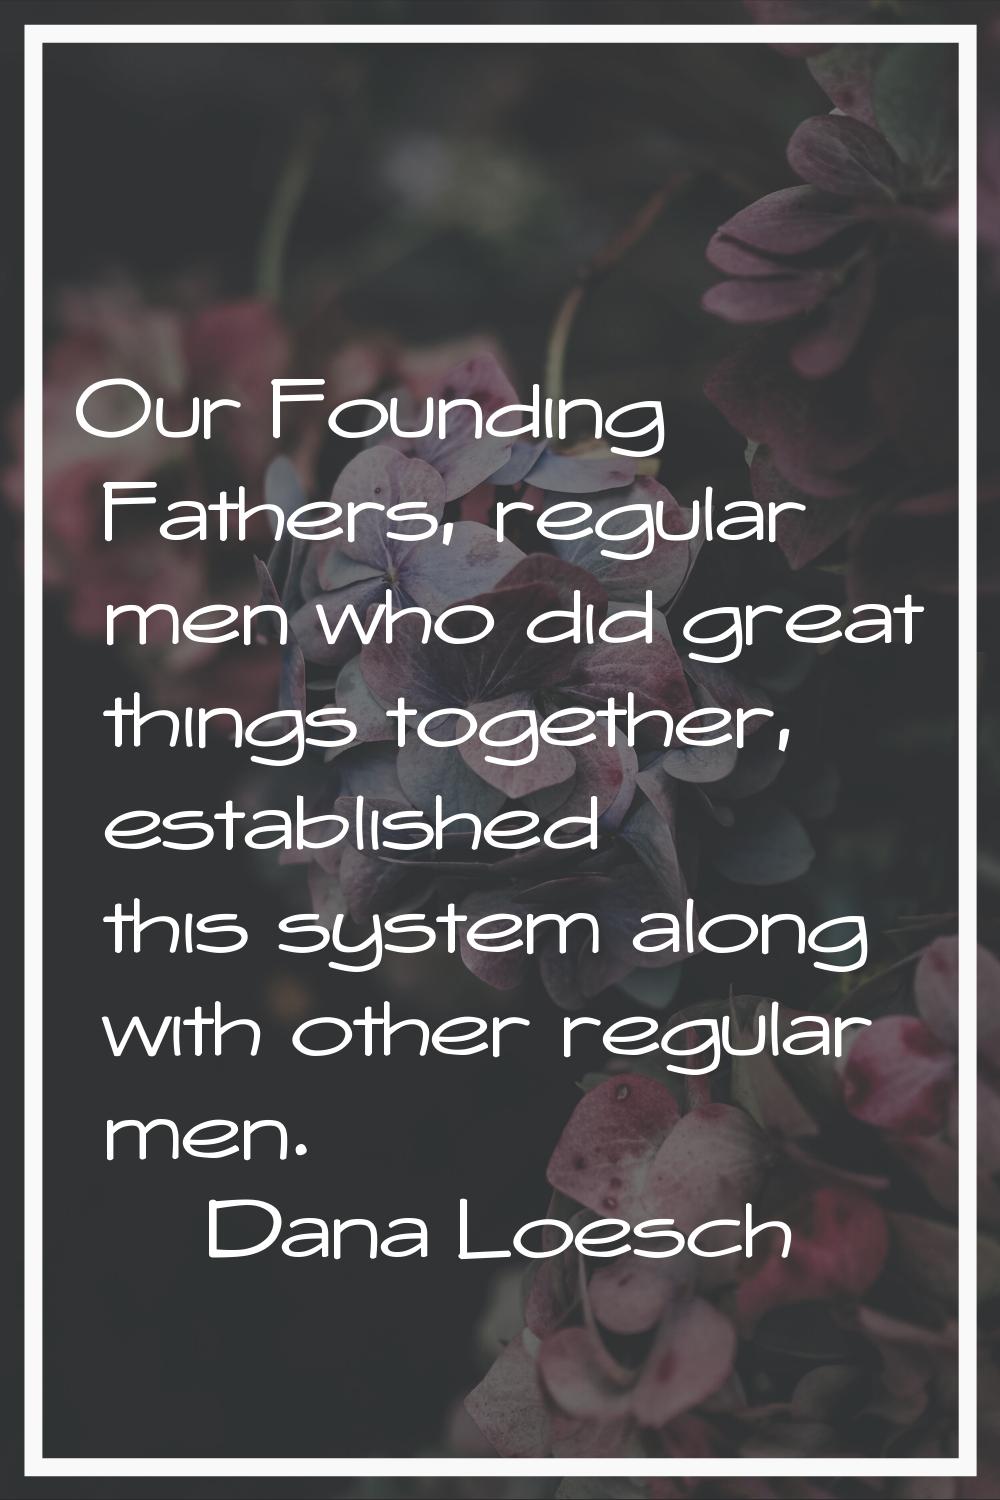 Our Founding Fathers, regular men who did great things together, established this system along with